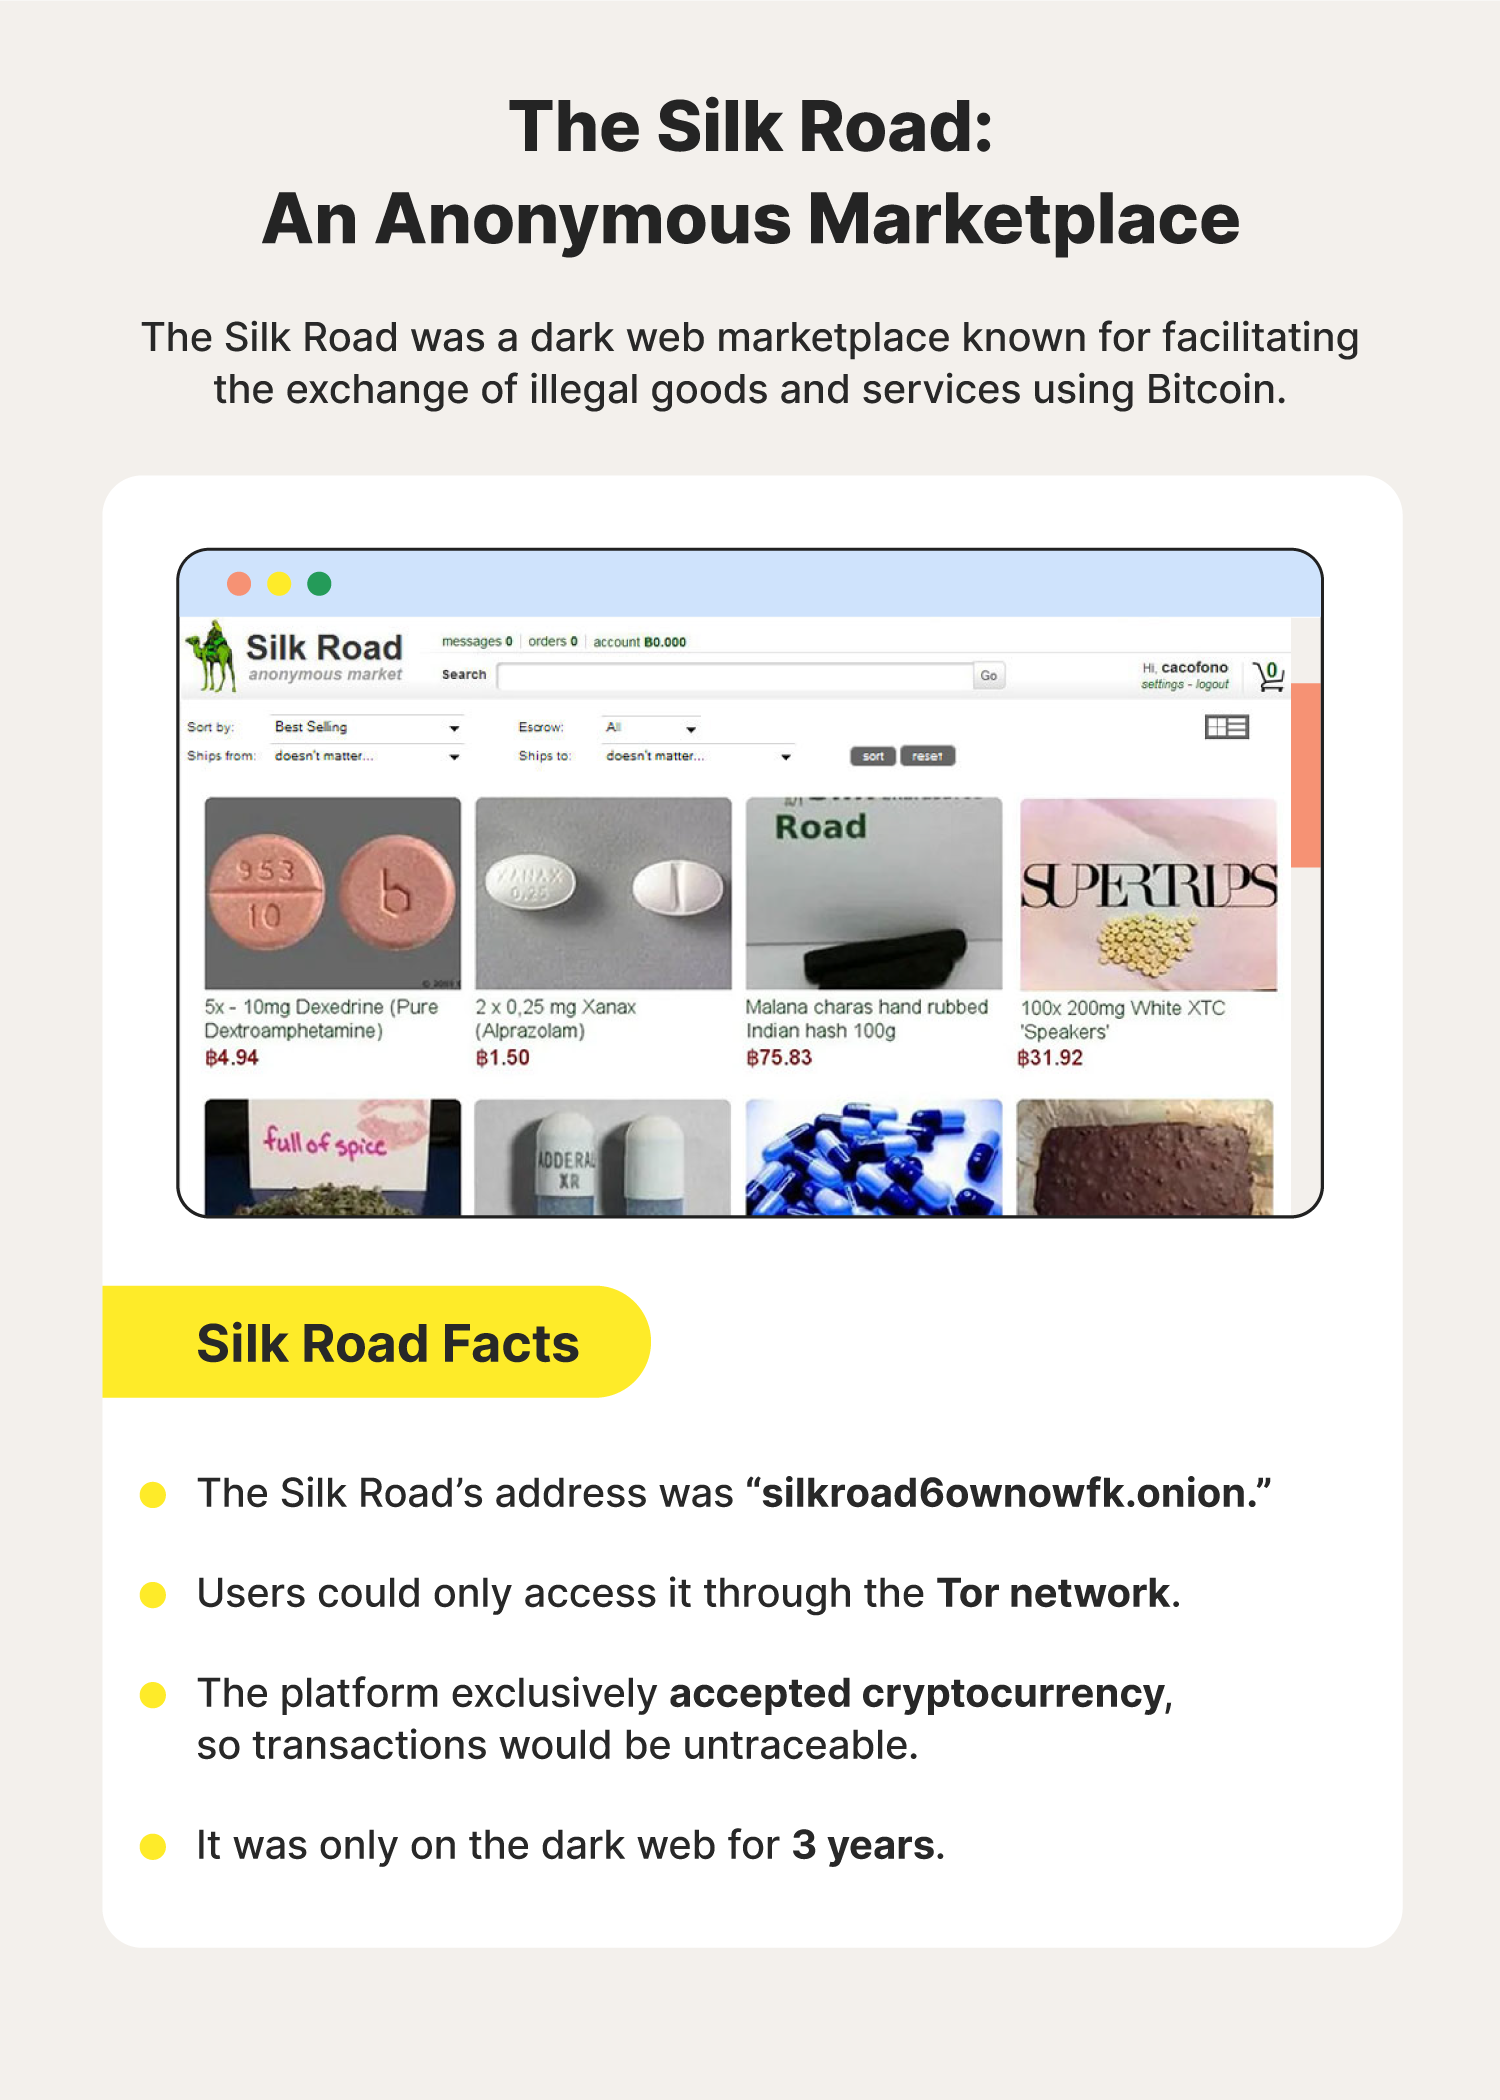 An infographic displaying facts about the digital Silk Road.